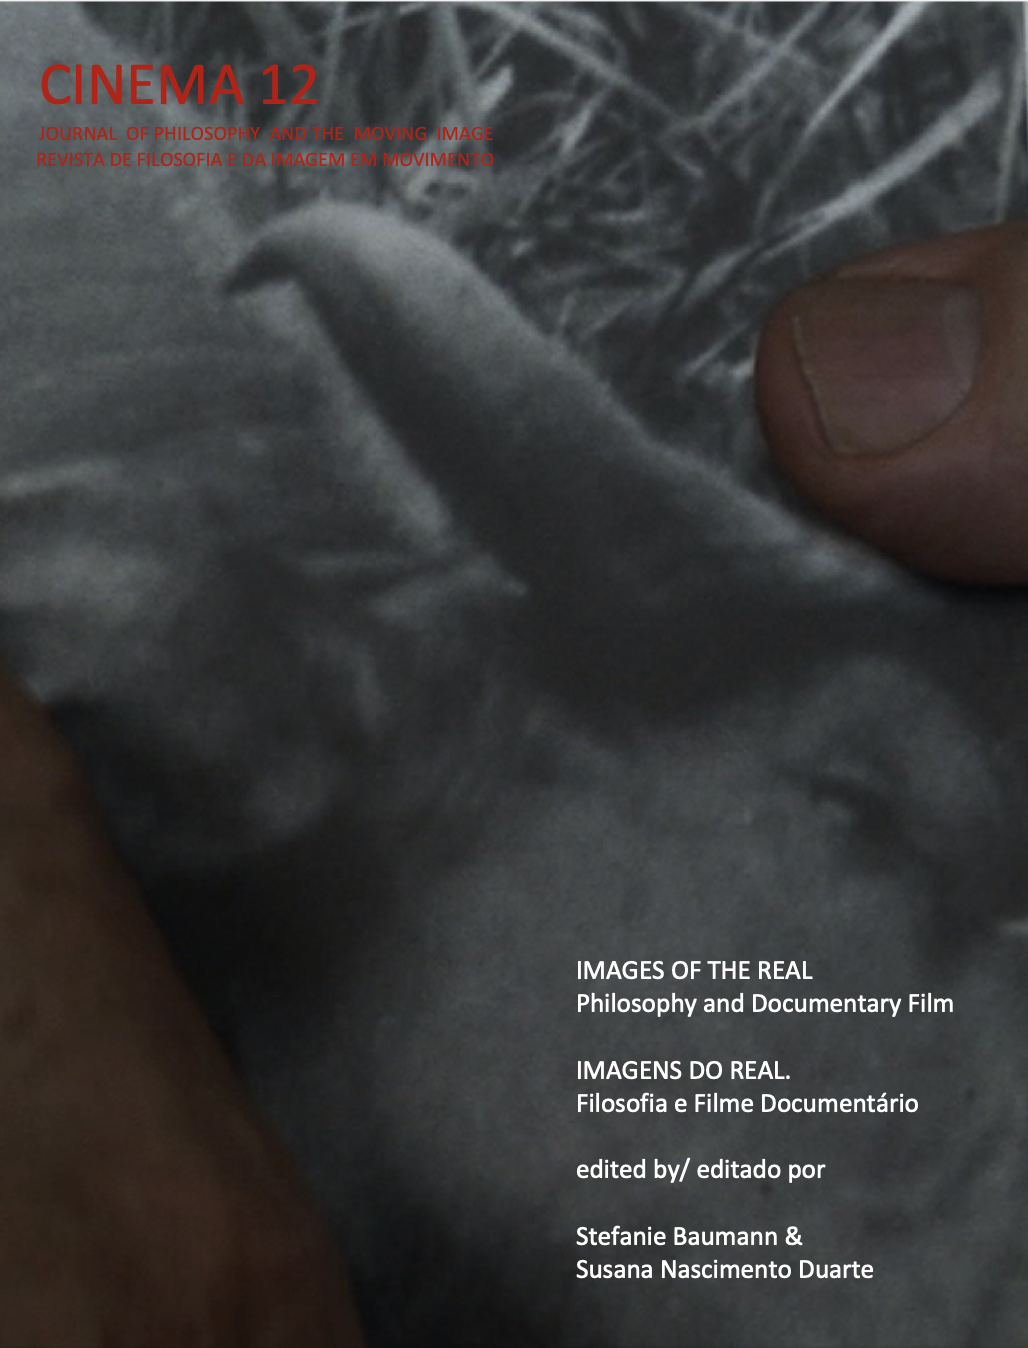 					View No. 12 (2020): Images of the Real: Philosophy and Documentary Film
				